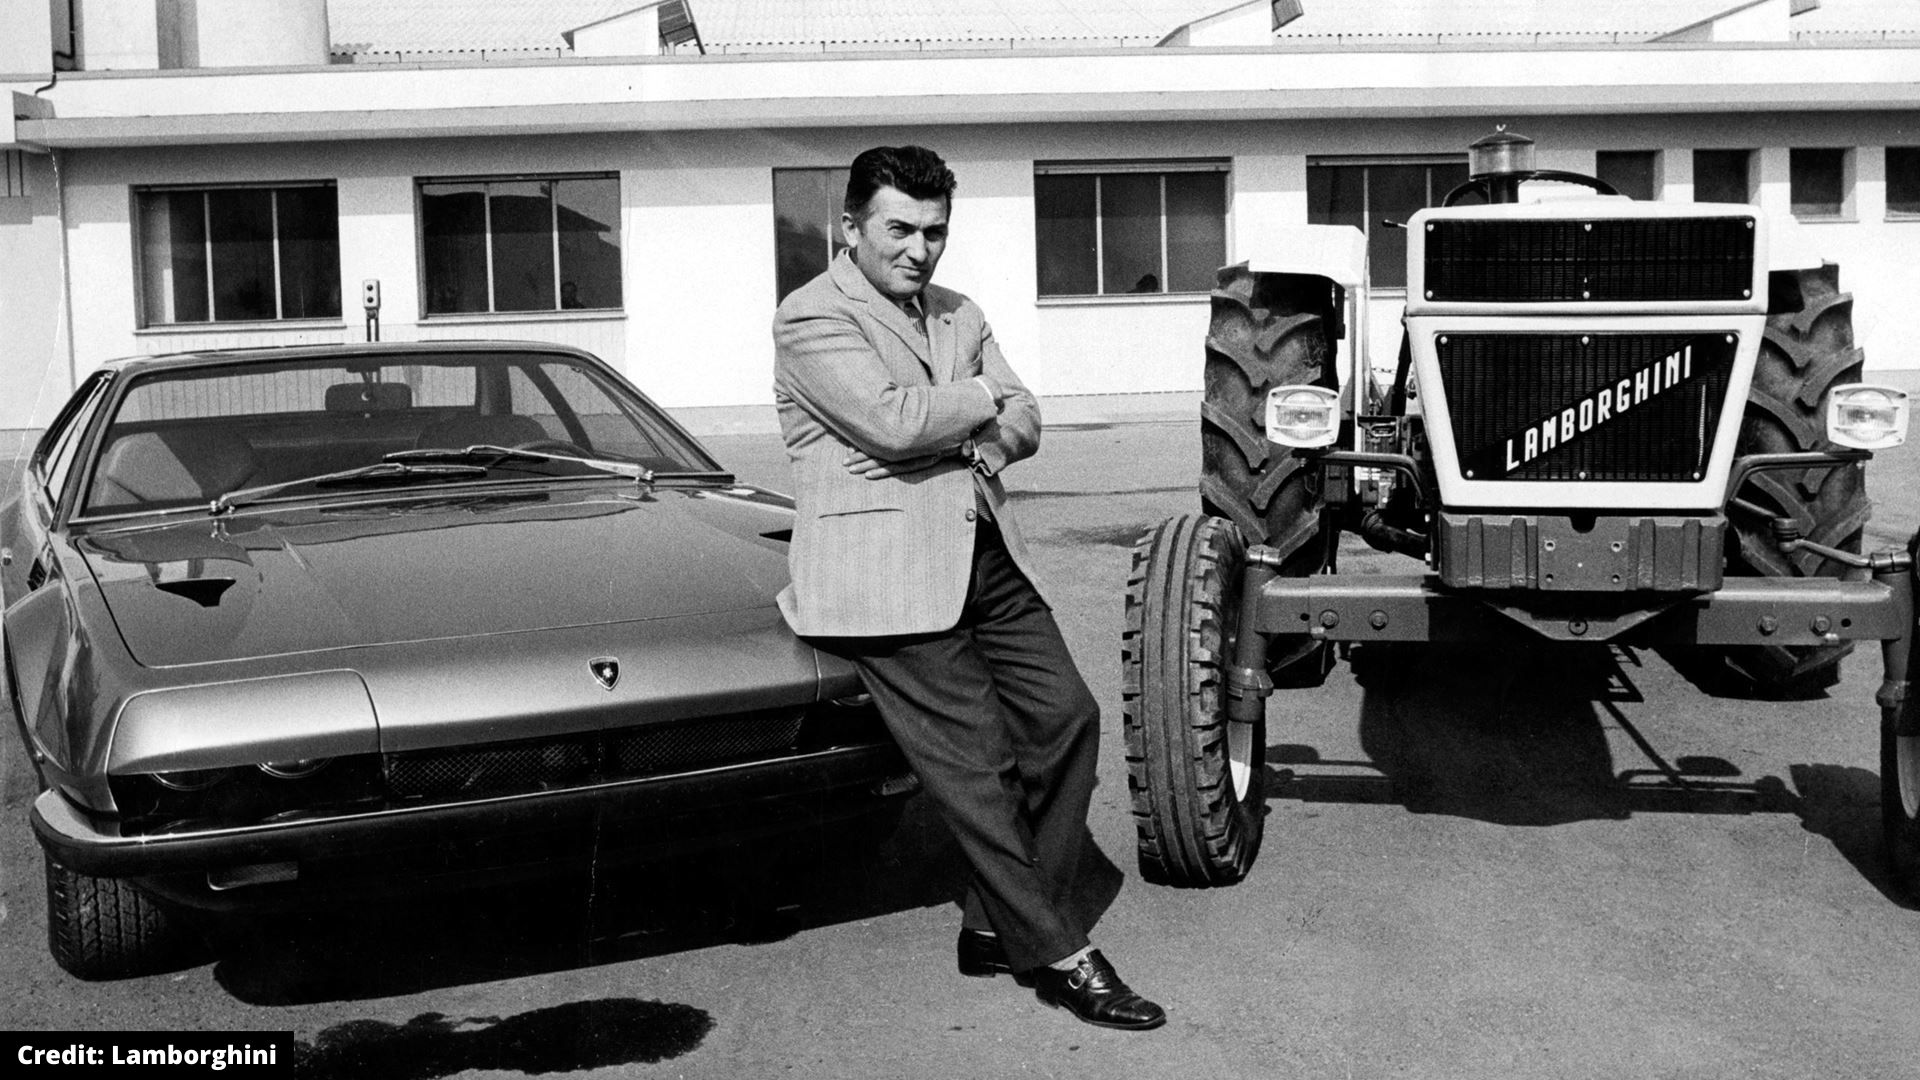 Man standing by Lamborghini car and tractor